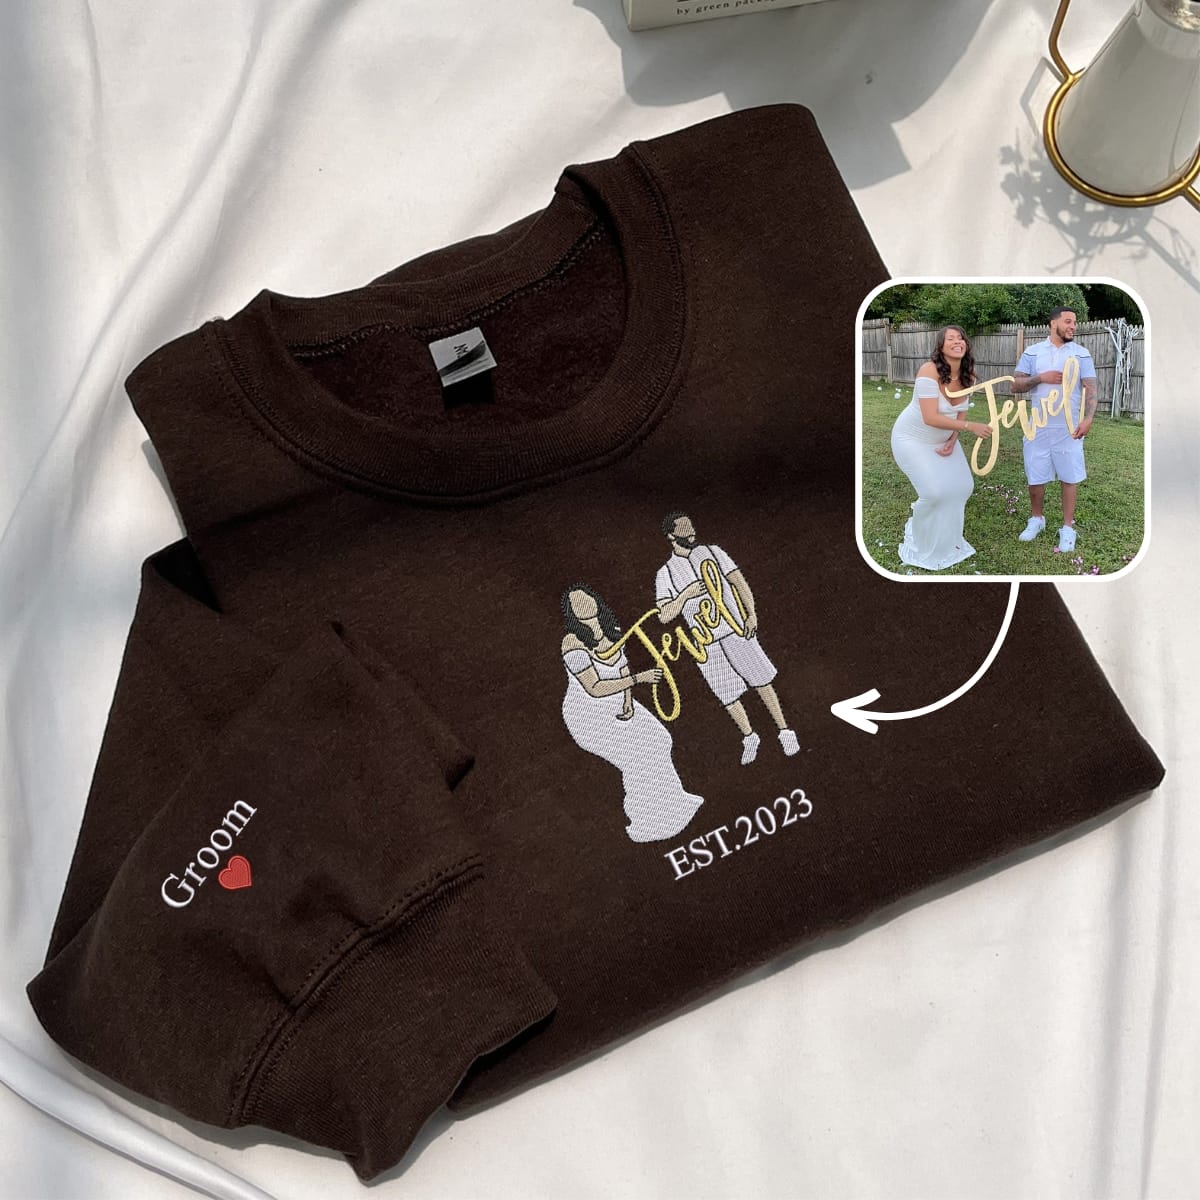 Personalized Wedding Shower Gifts for Groom Sweatshirt with Embroidery Your Photo, Any Text on Sleeve